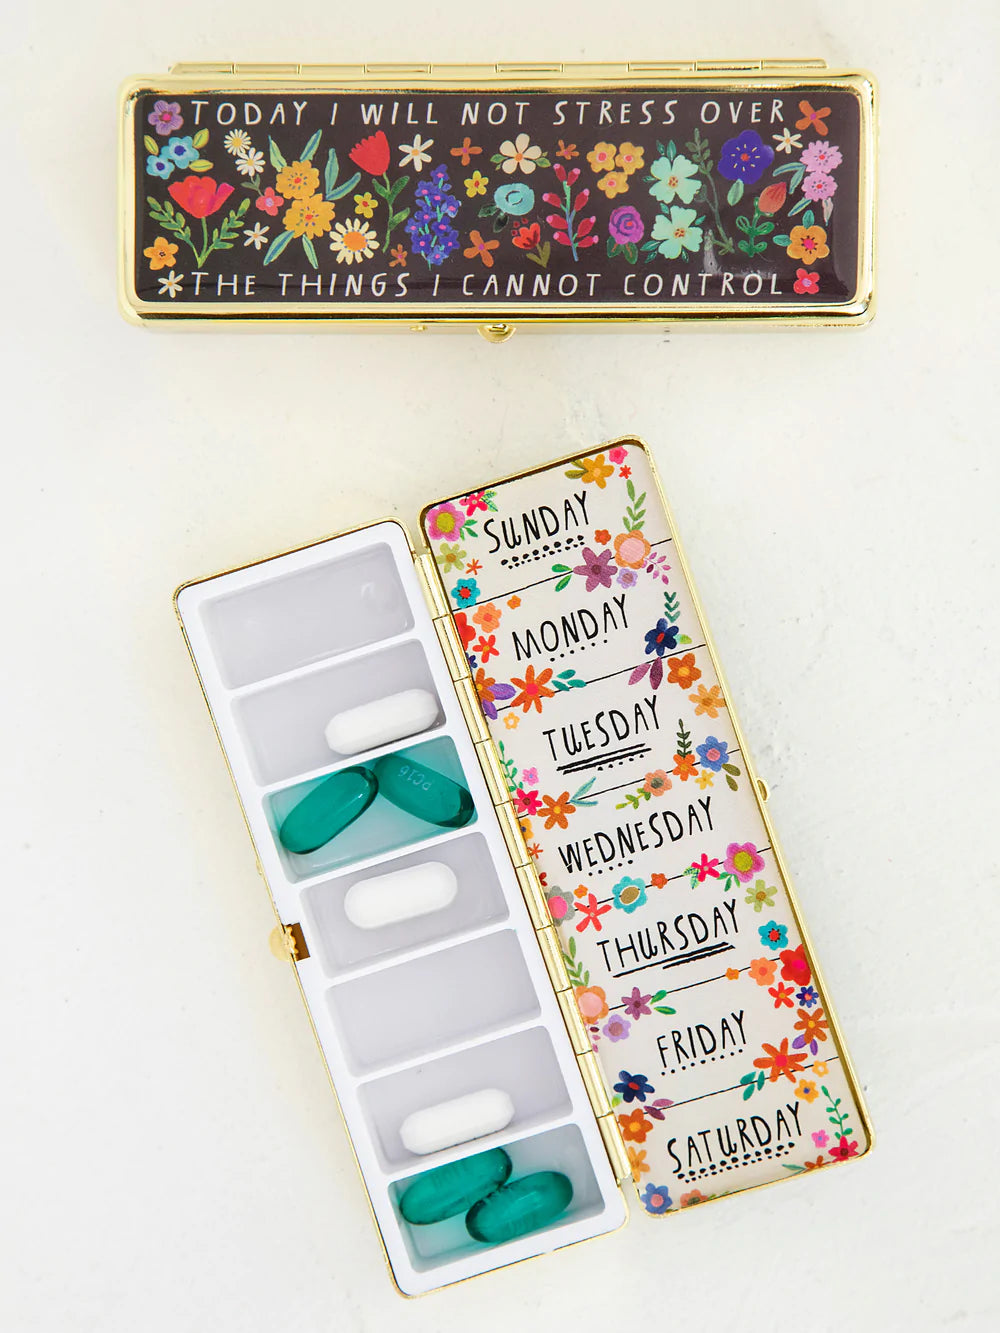 Daily Pill Box - Today I Will Not Stress Over